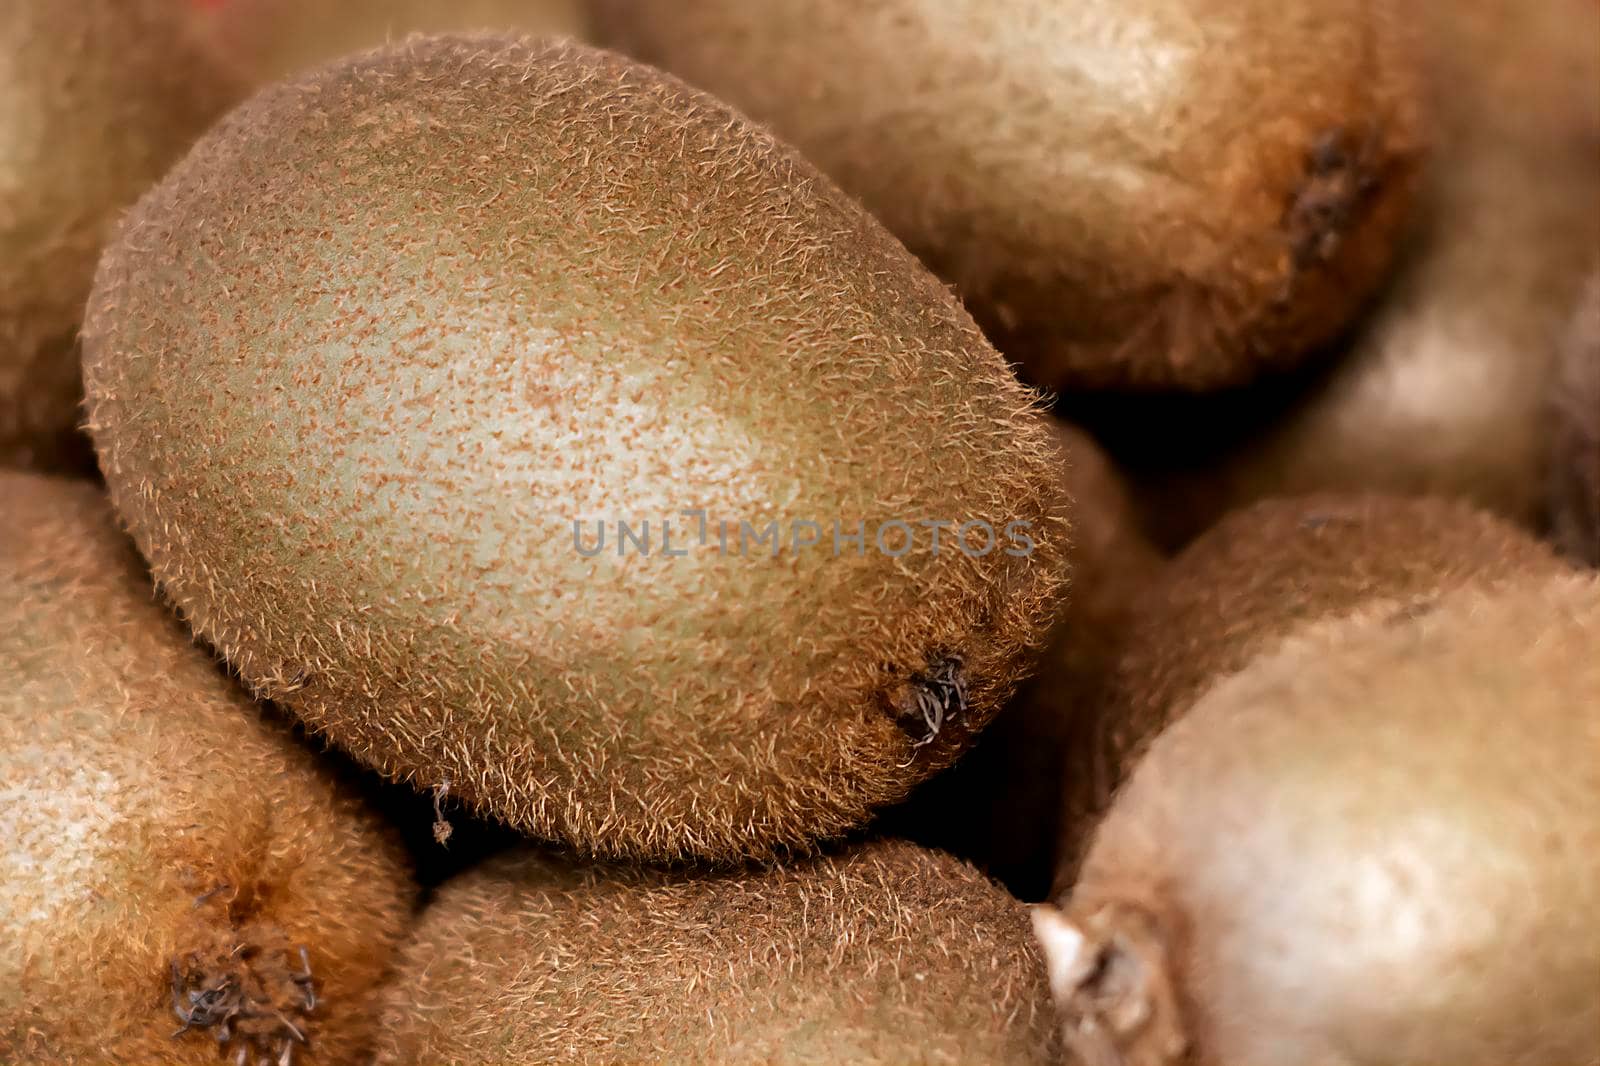 Close-up view of a group of kiwifruit with hairy skin.